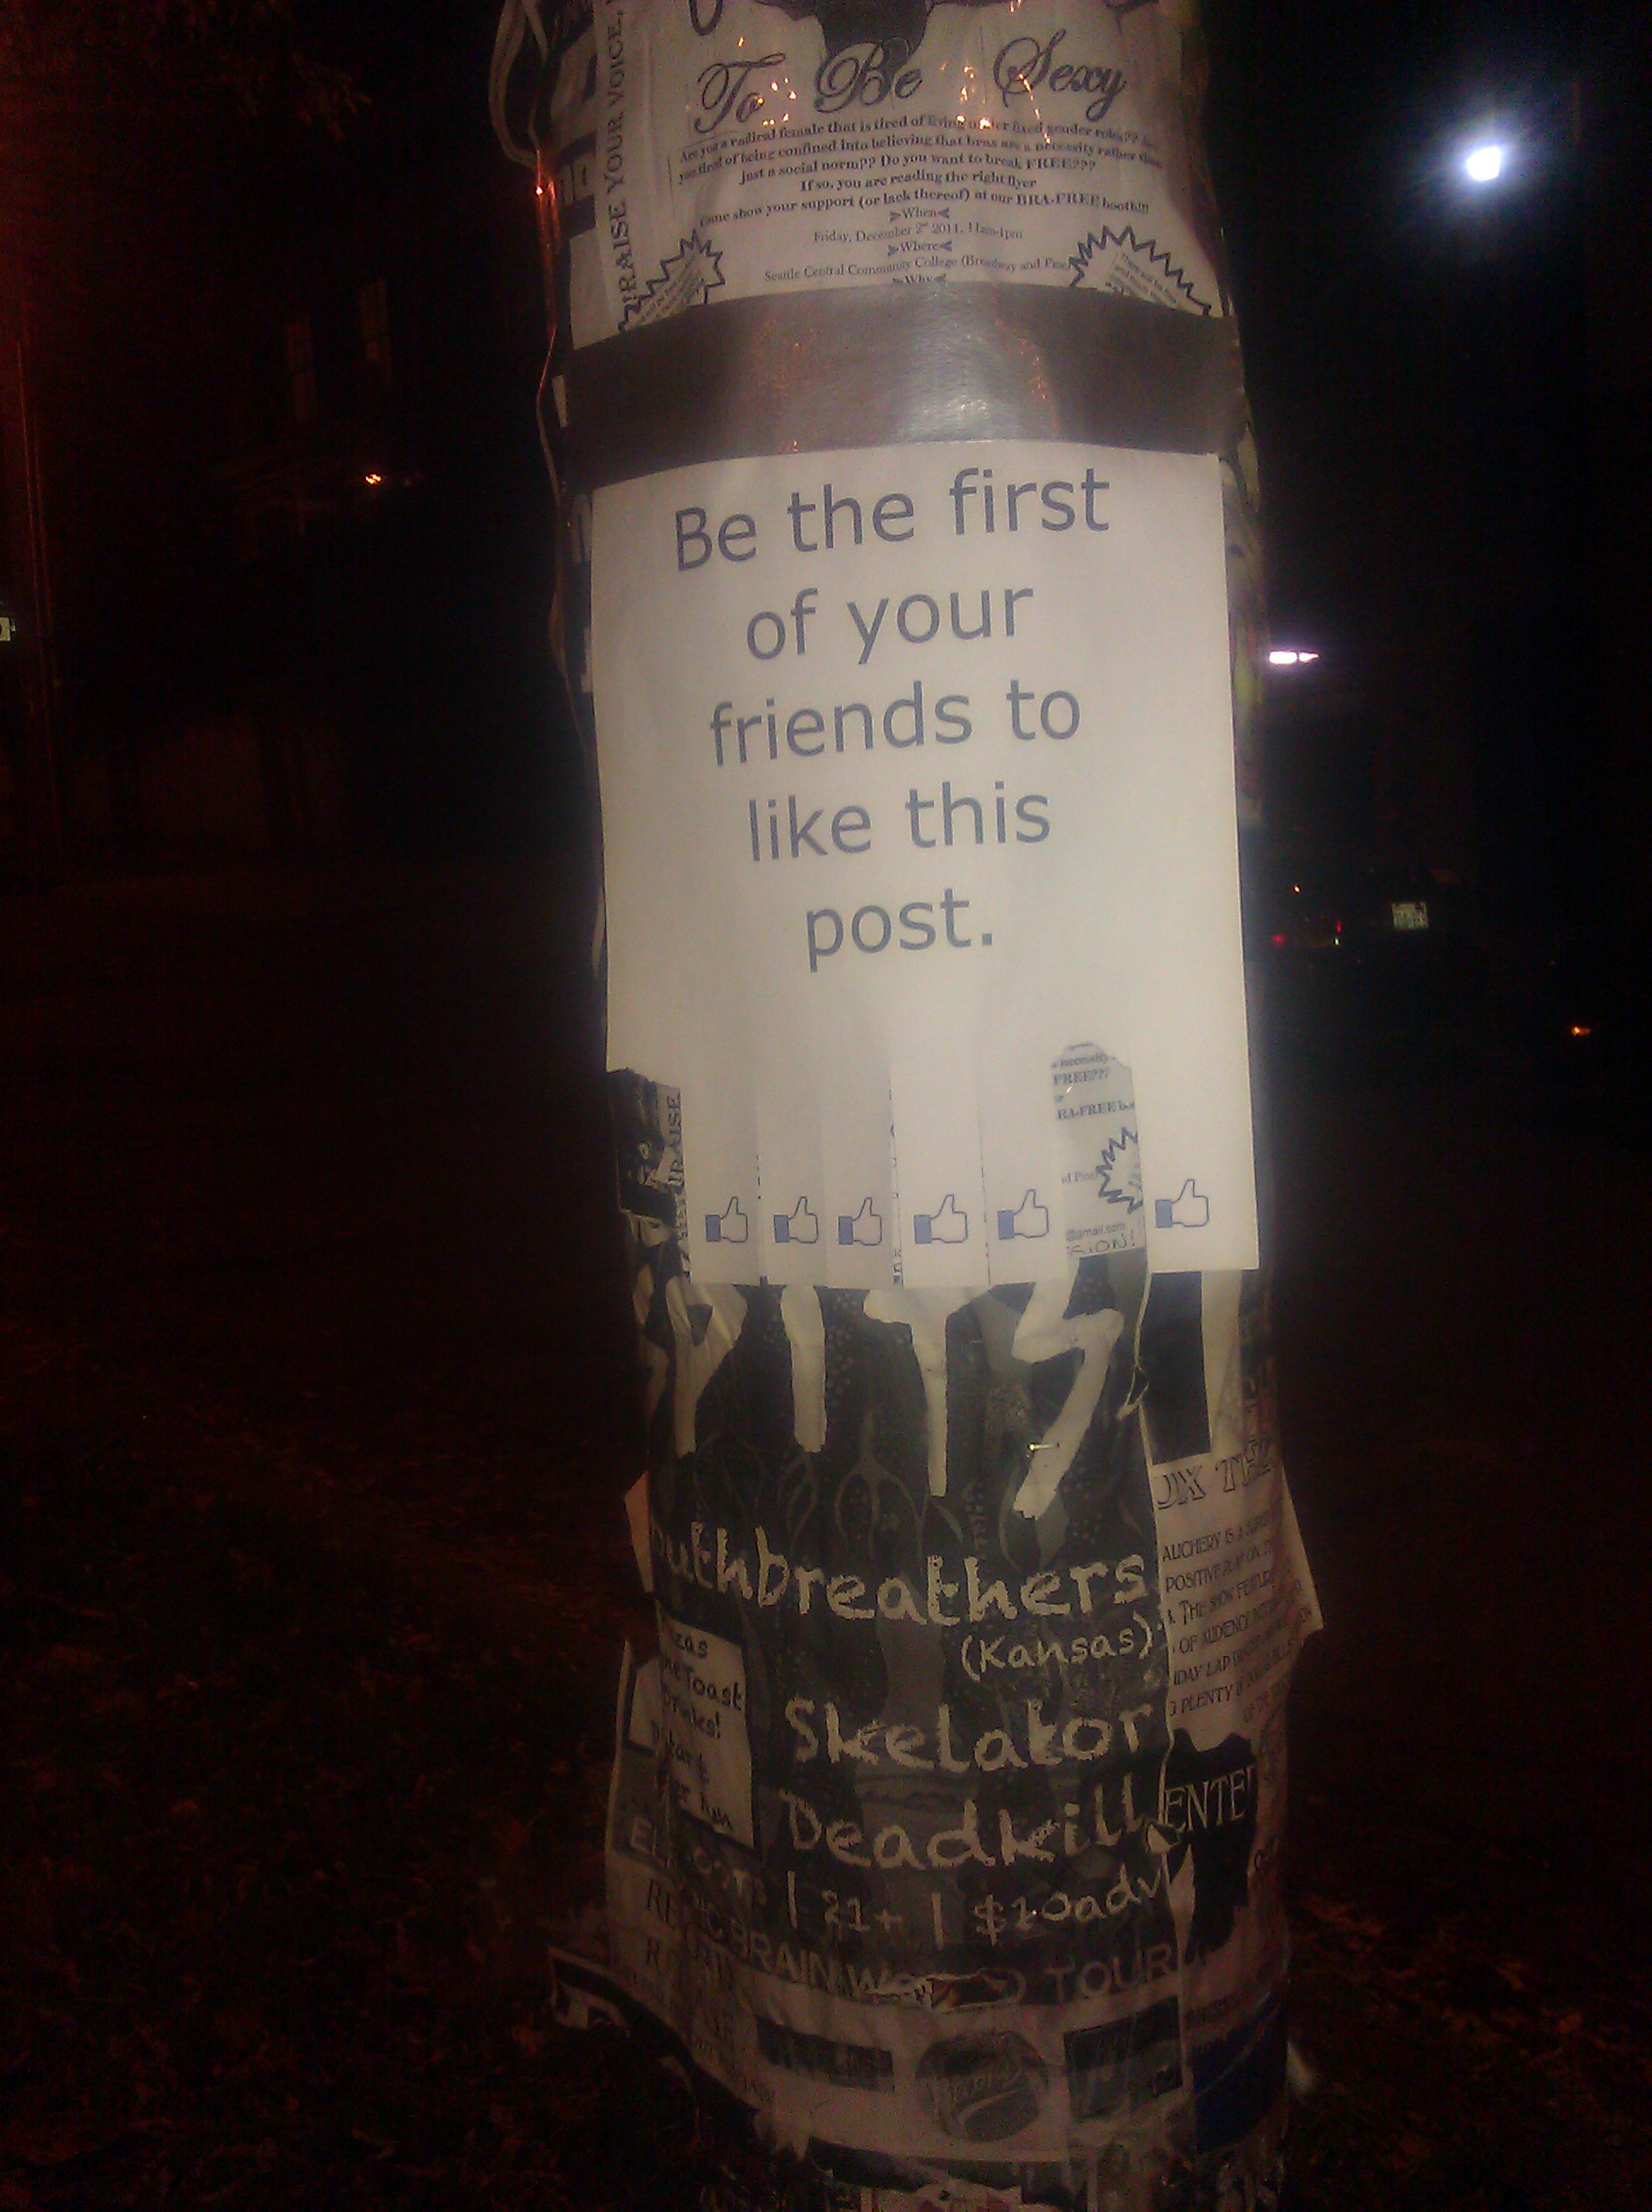 Found this on a telephone post in seattle